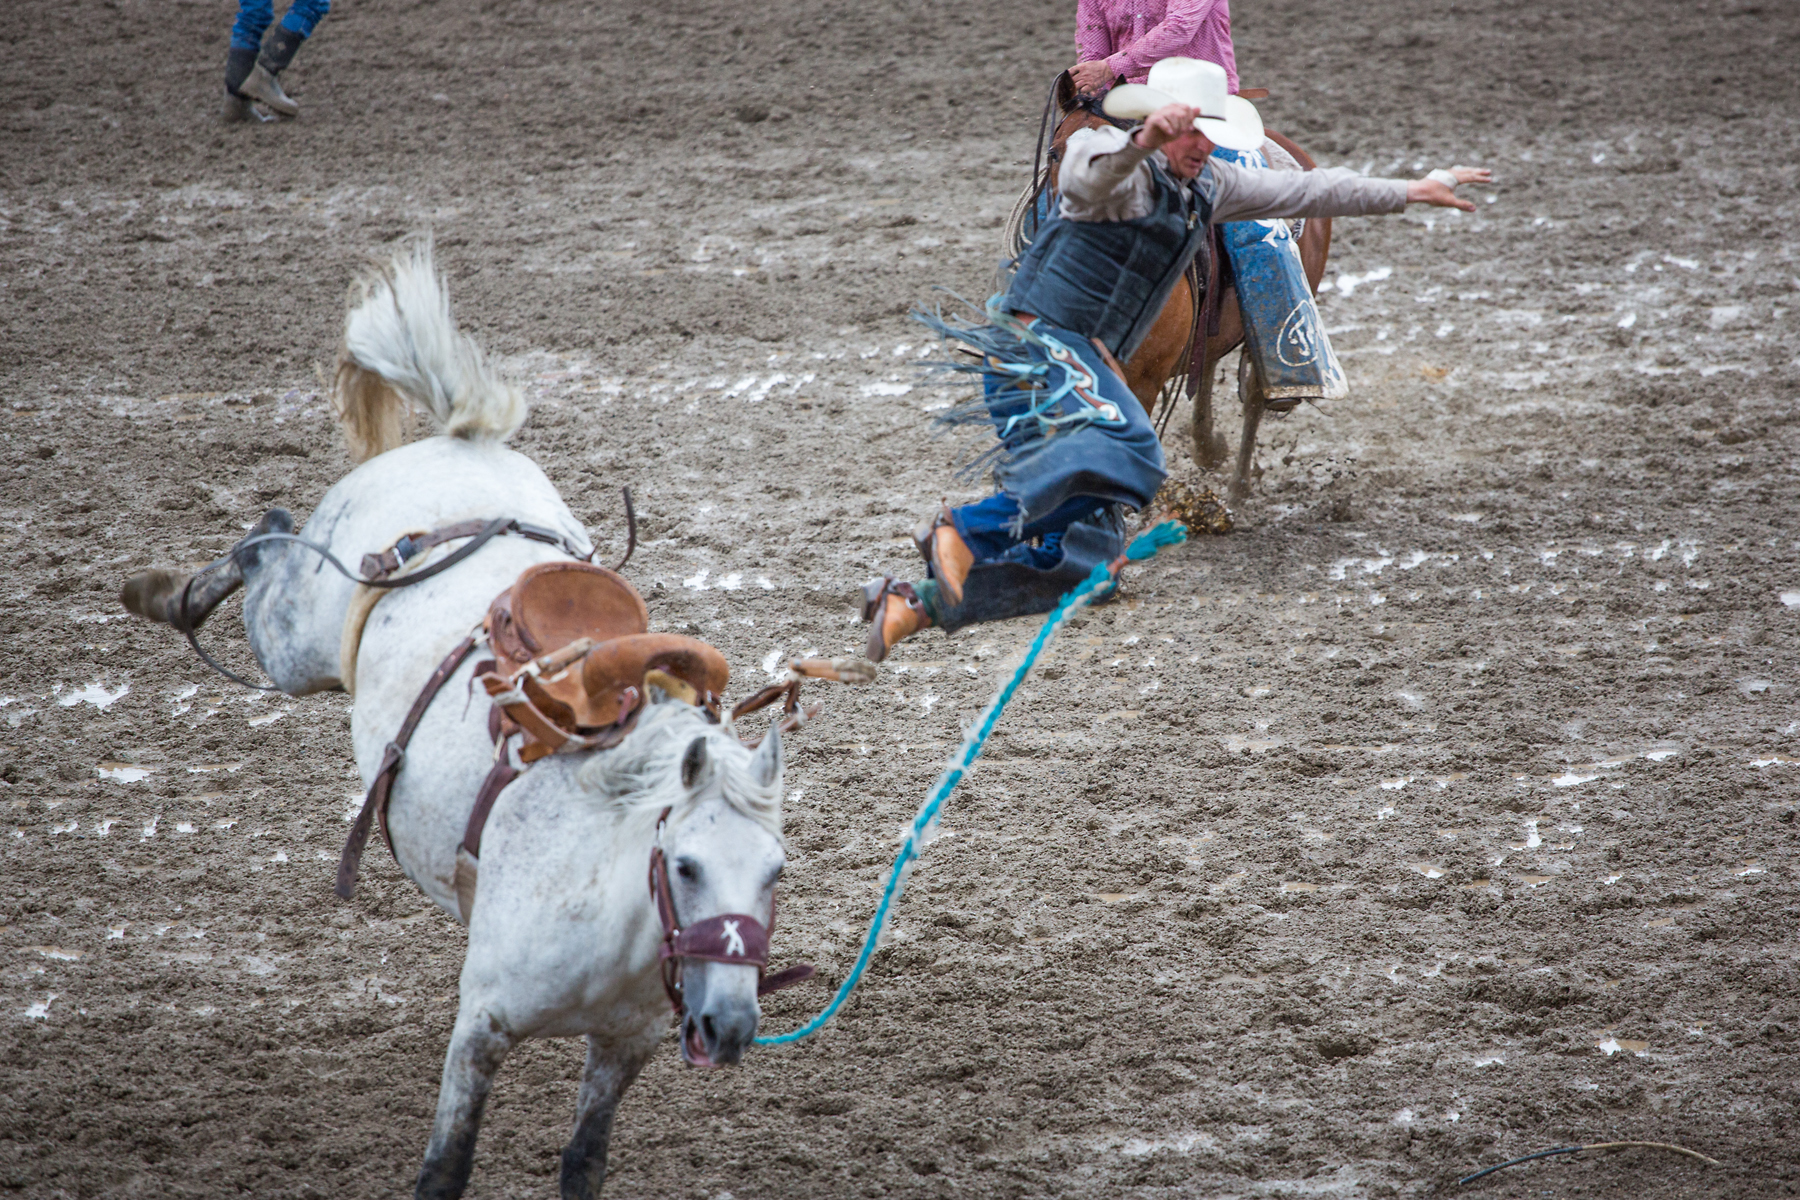 Saddle bronc at Home of Champions Rodeo, Red Lodge, MT, July 4, 2021.  Click for next photo.